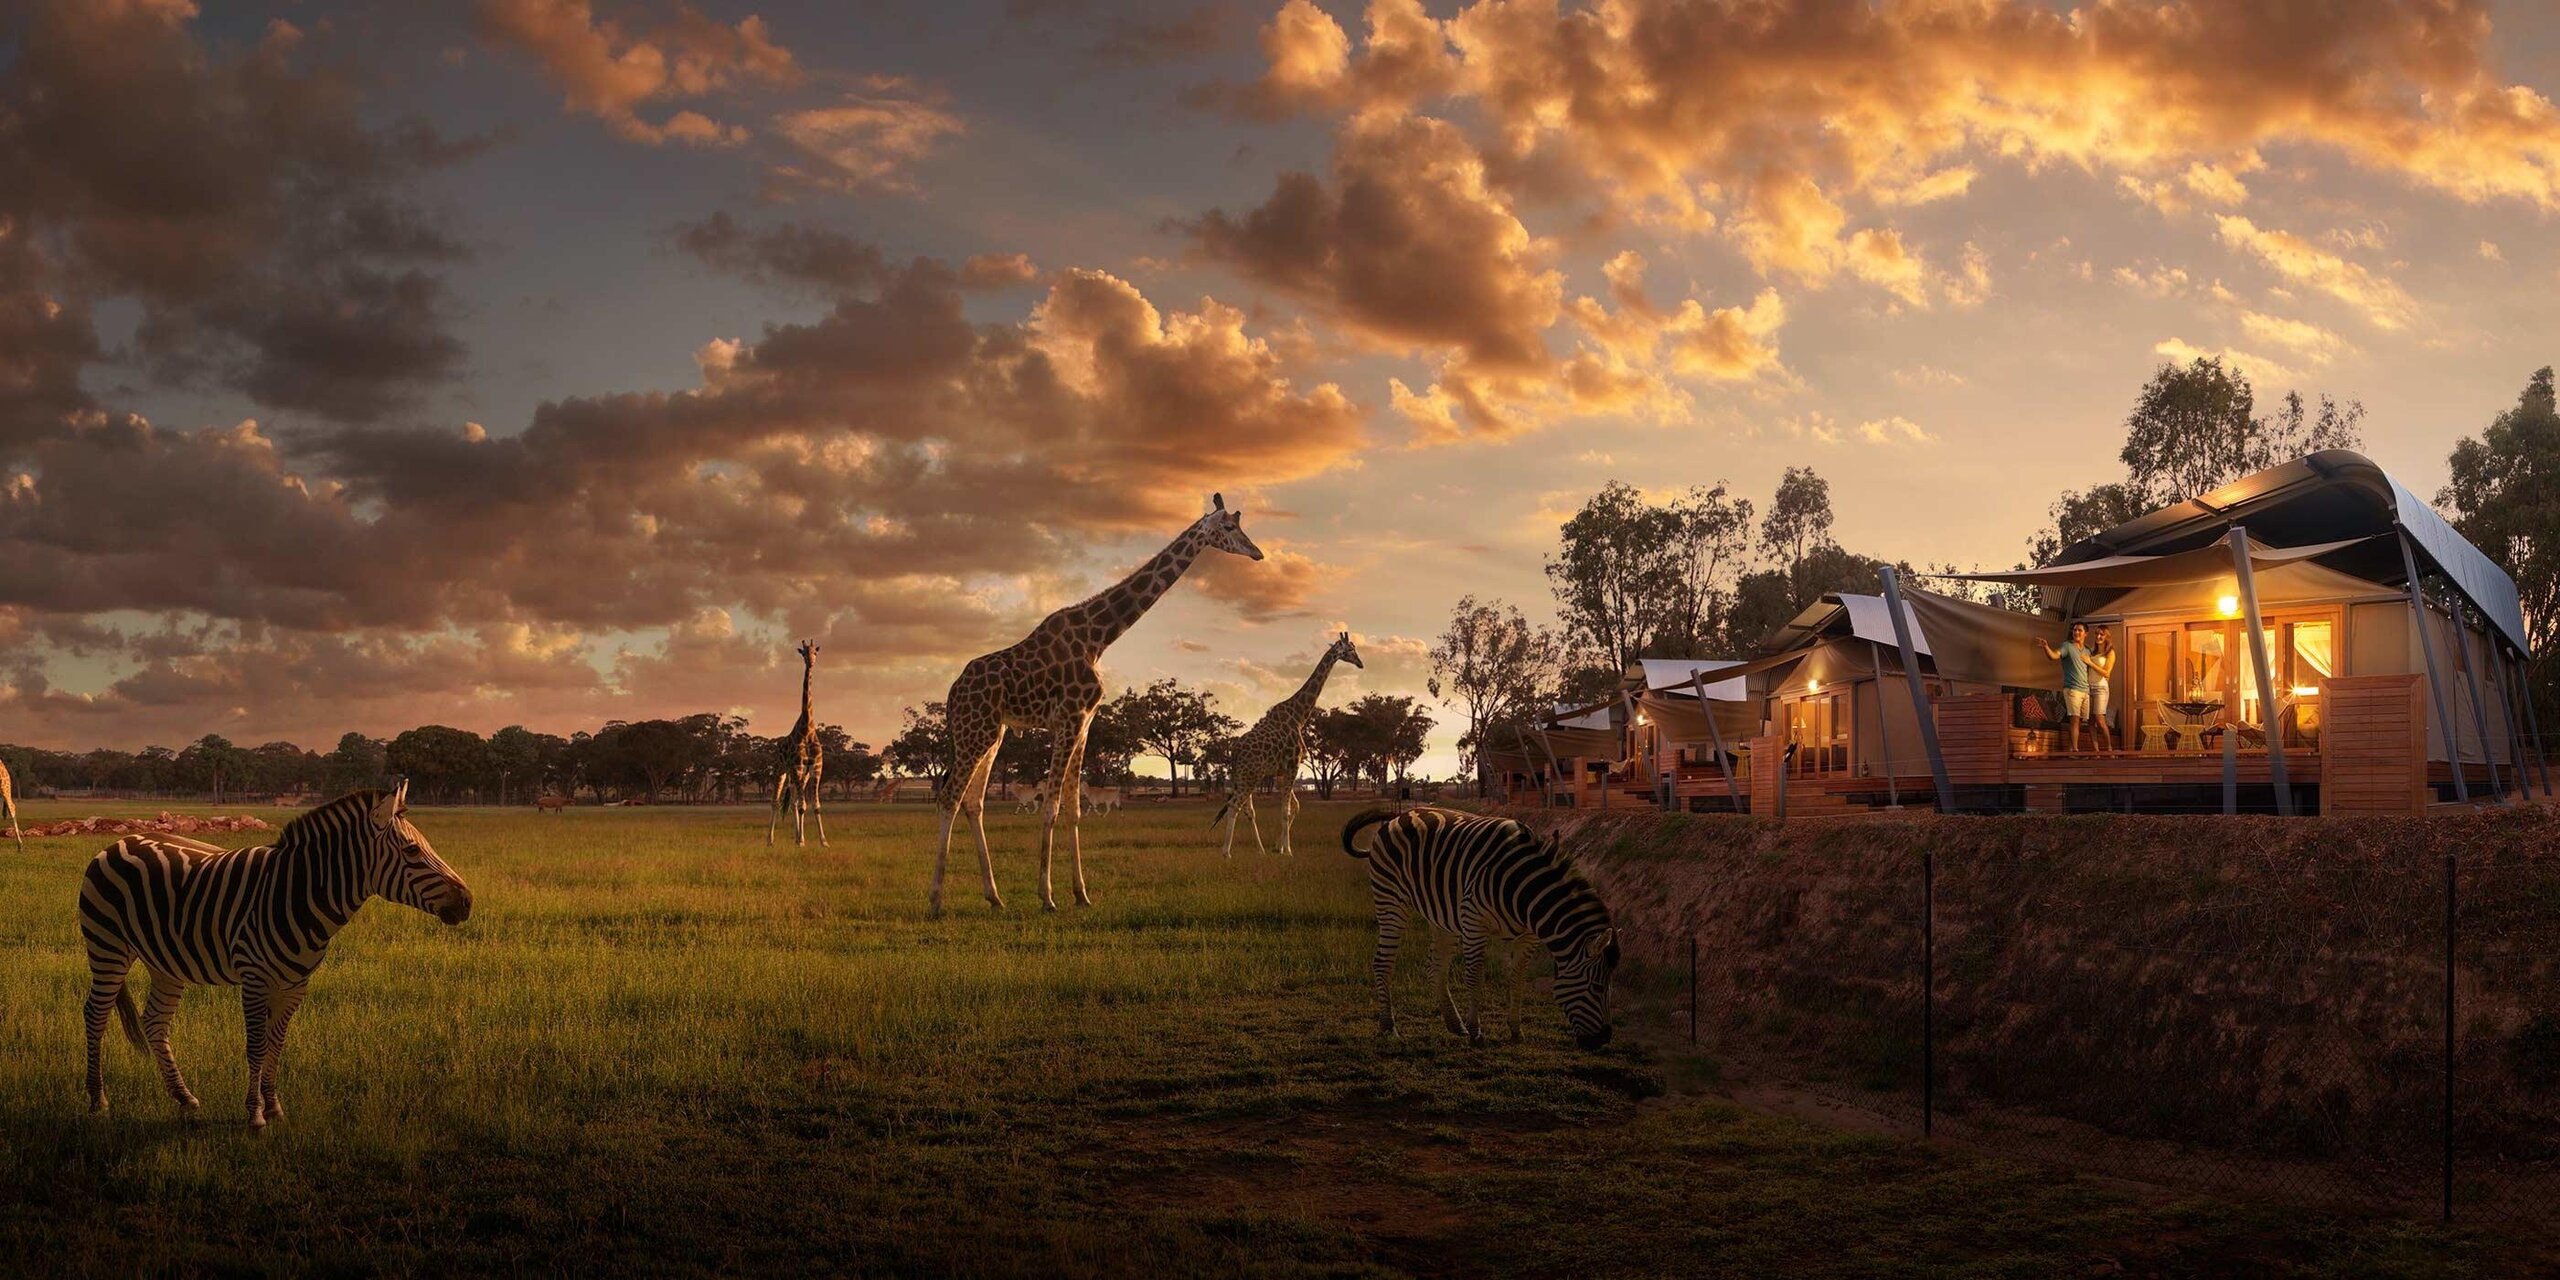 Zebras and giraffes looking at glamping accommodation